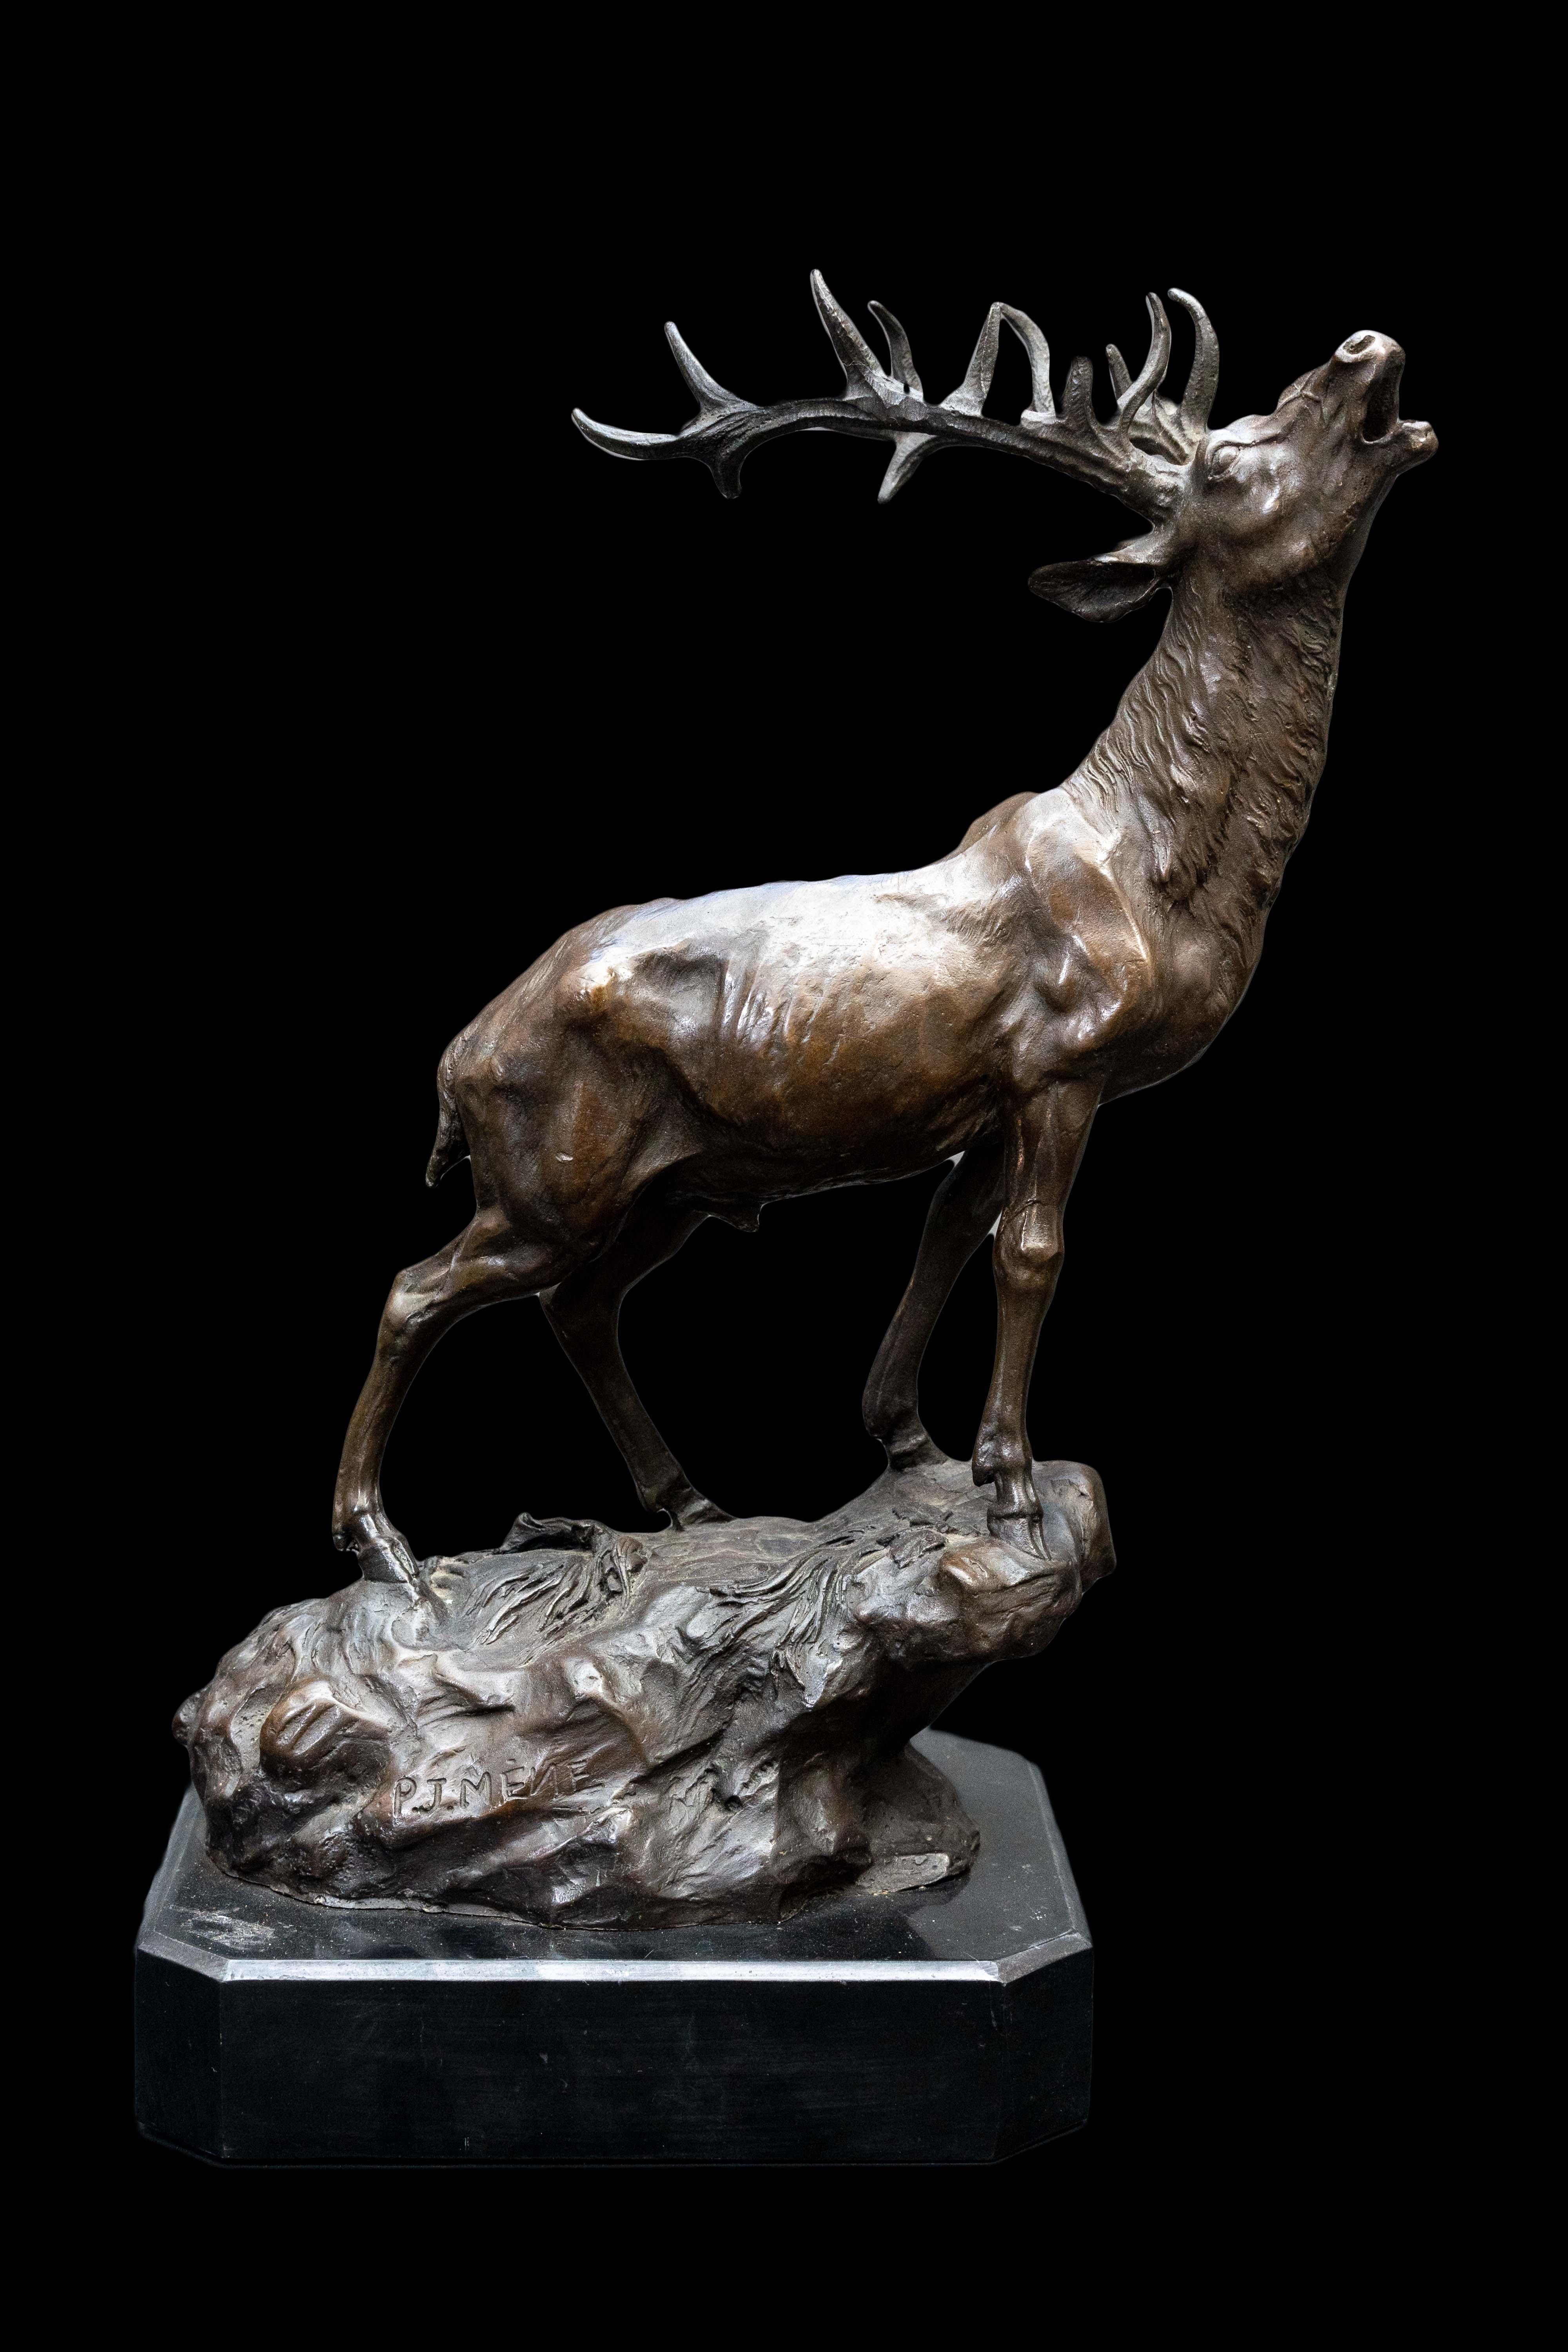 19th Century French Bronze Stag on Marble Base Marked Mene Pierre Jules Mene

Measures Approximately: 10